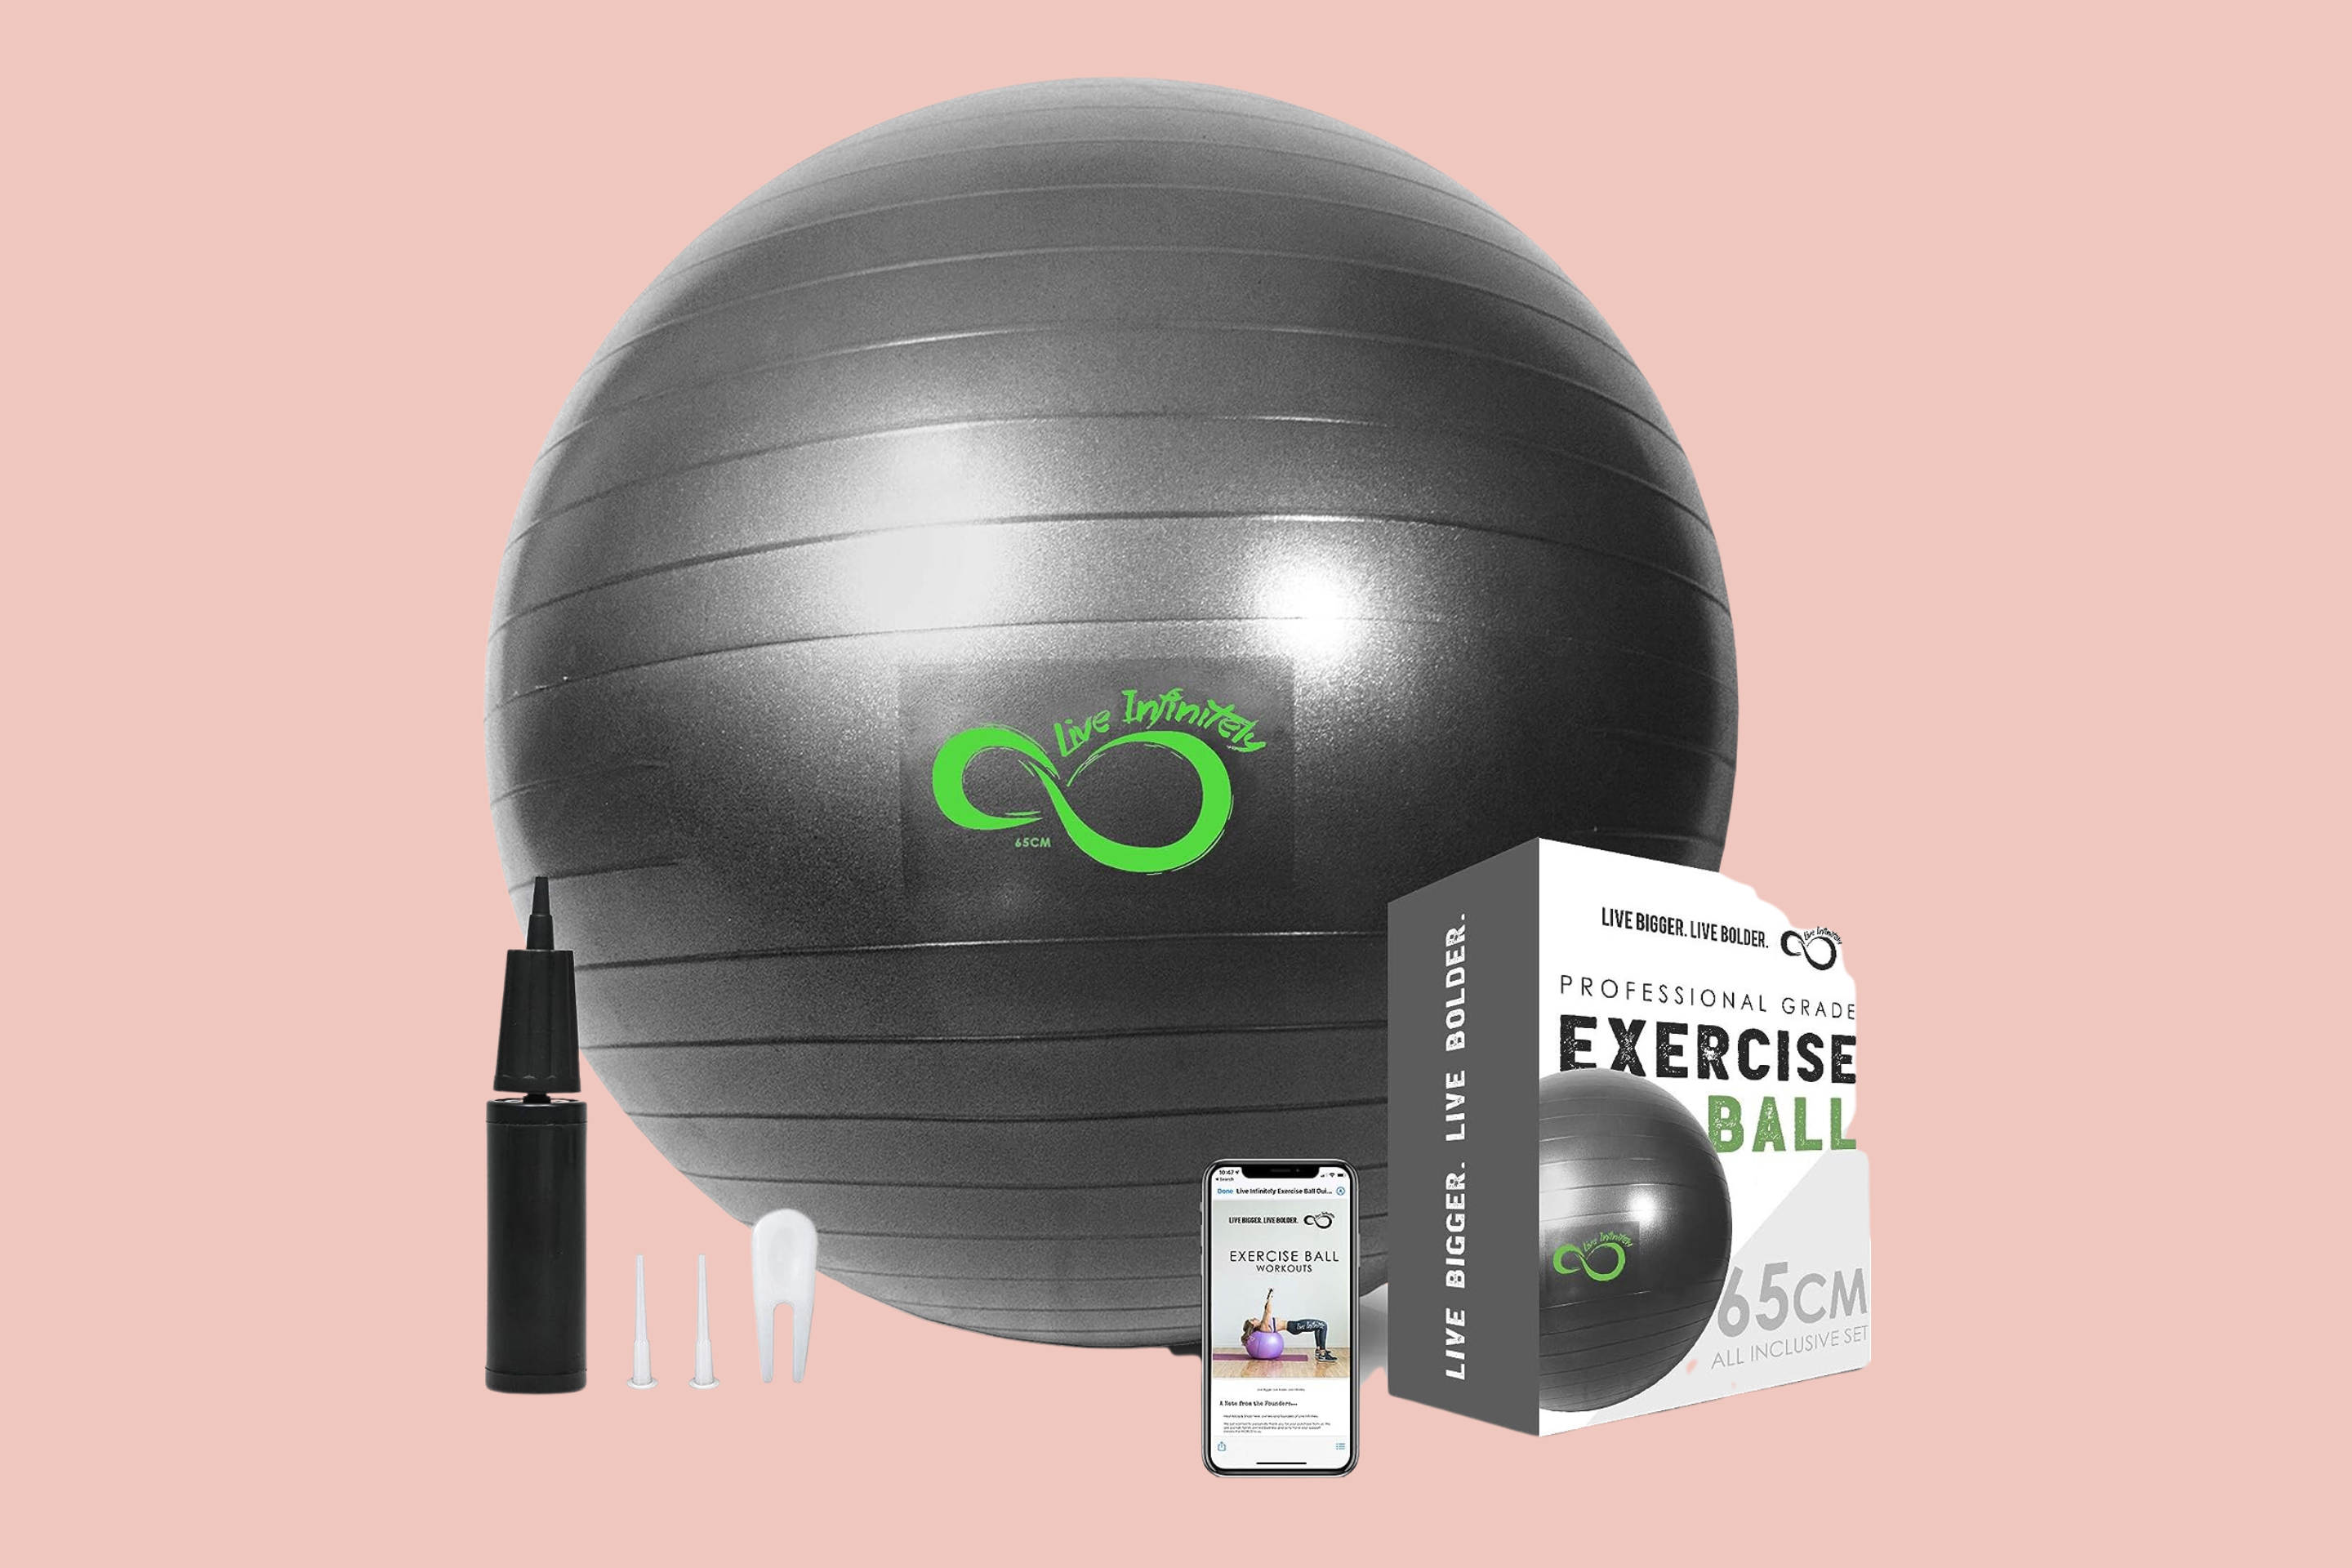 Live Infinitely Home Exercise Equipment Workout Plans